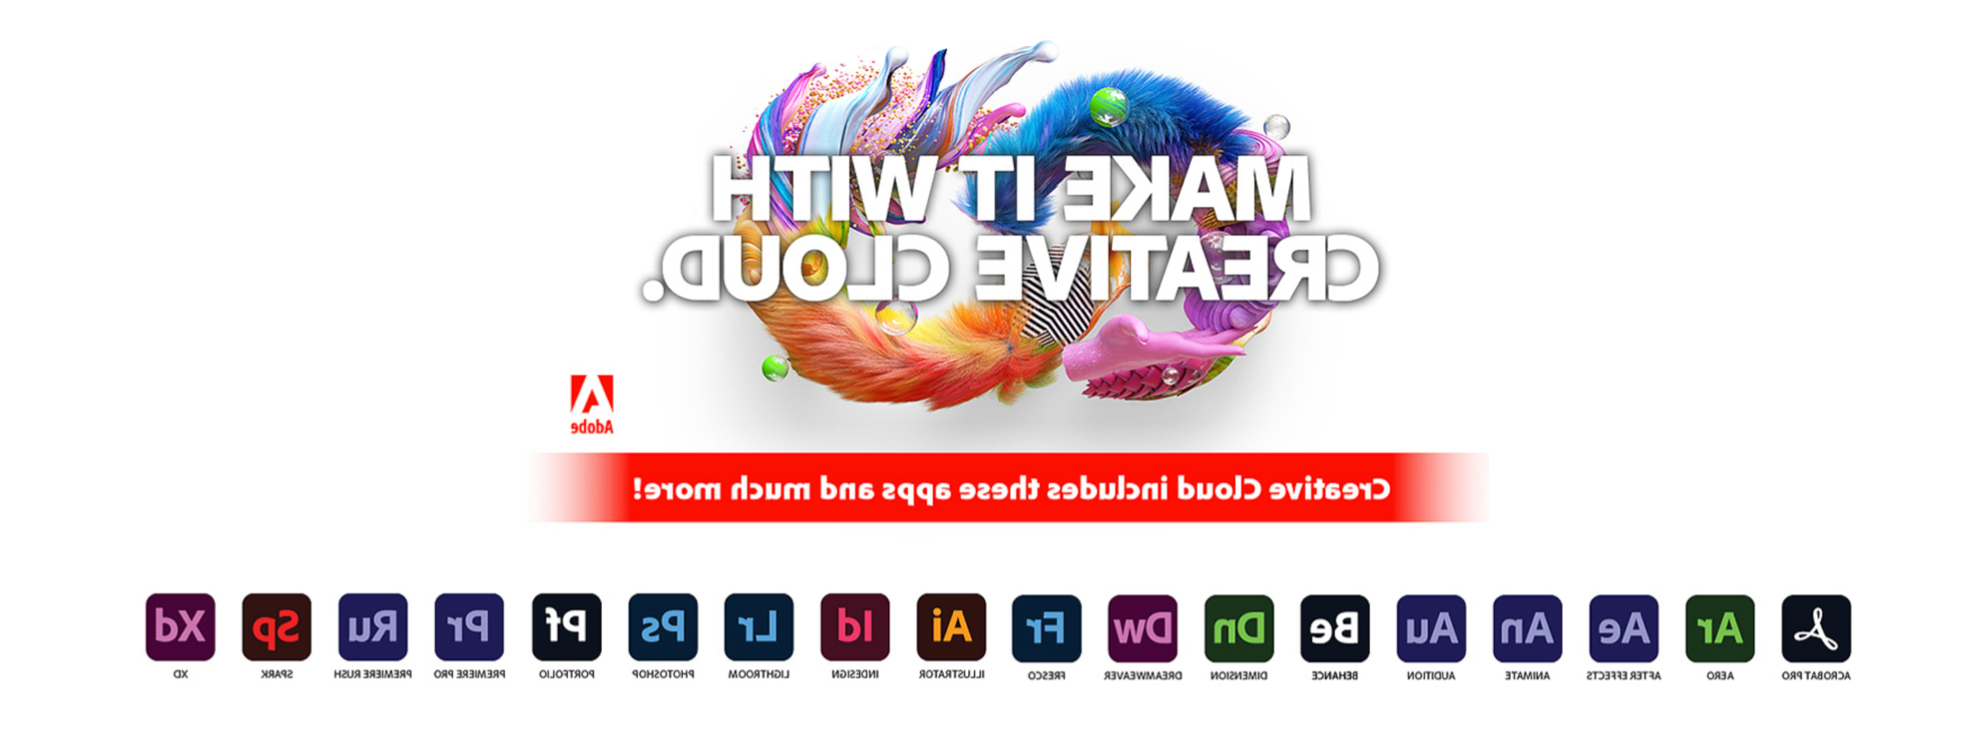 Image Text. Creative Cloud includes these apps and much more!  Acrobat Pro, Aero, After Effects, Animate, Audition, Behance, Dimension, Dreamweaver, Fresco, Illustrator, Indesign, Lightroom, Photoshop, Portfolio, Premiere Pro, Premiere Rush, Spark and XD.